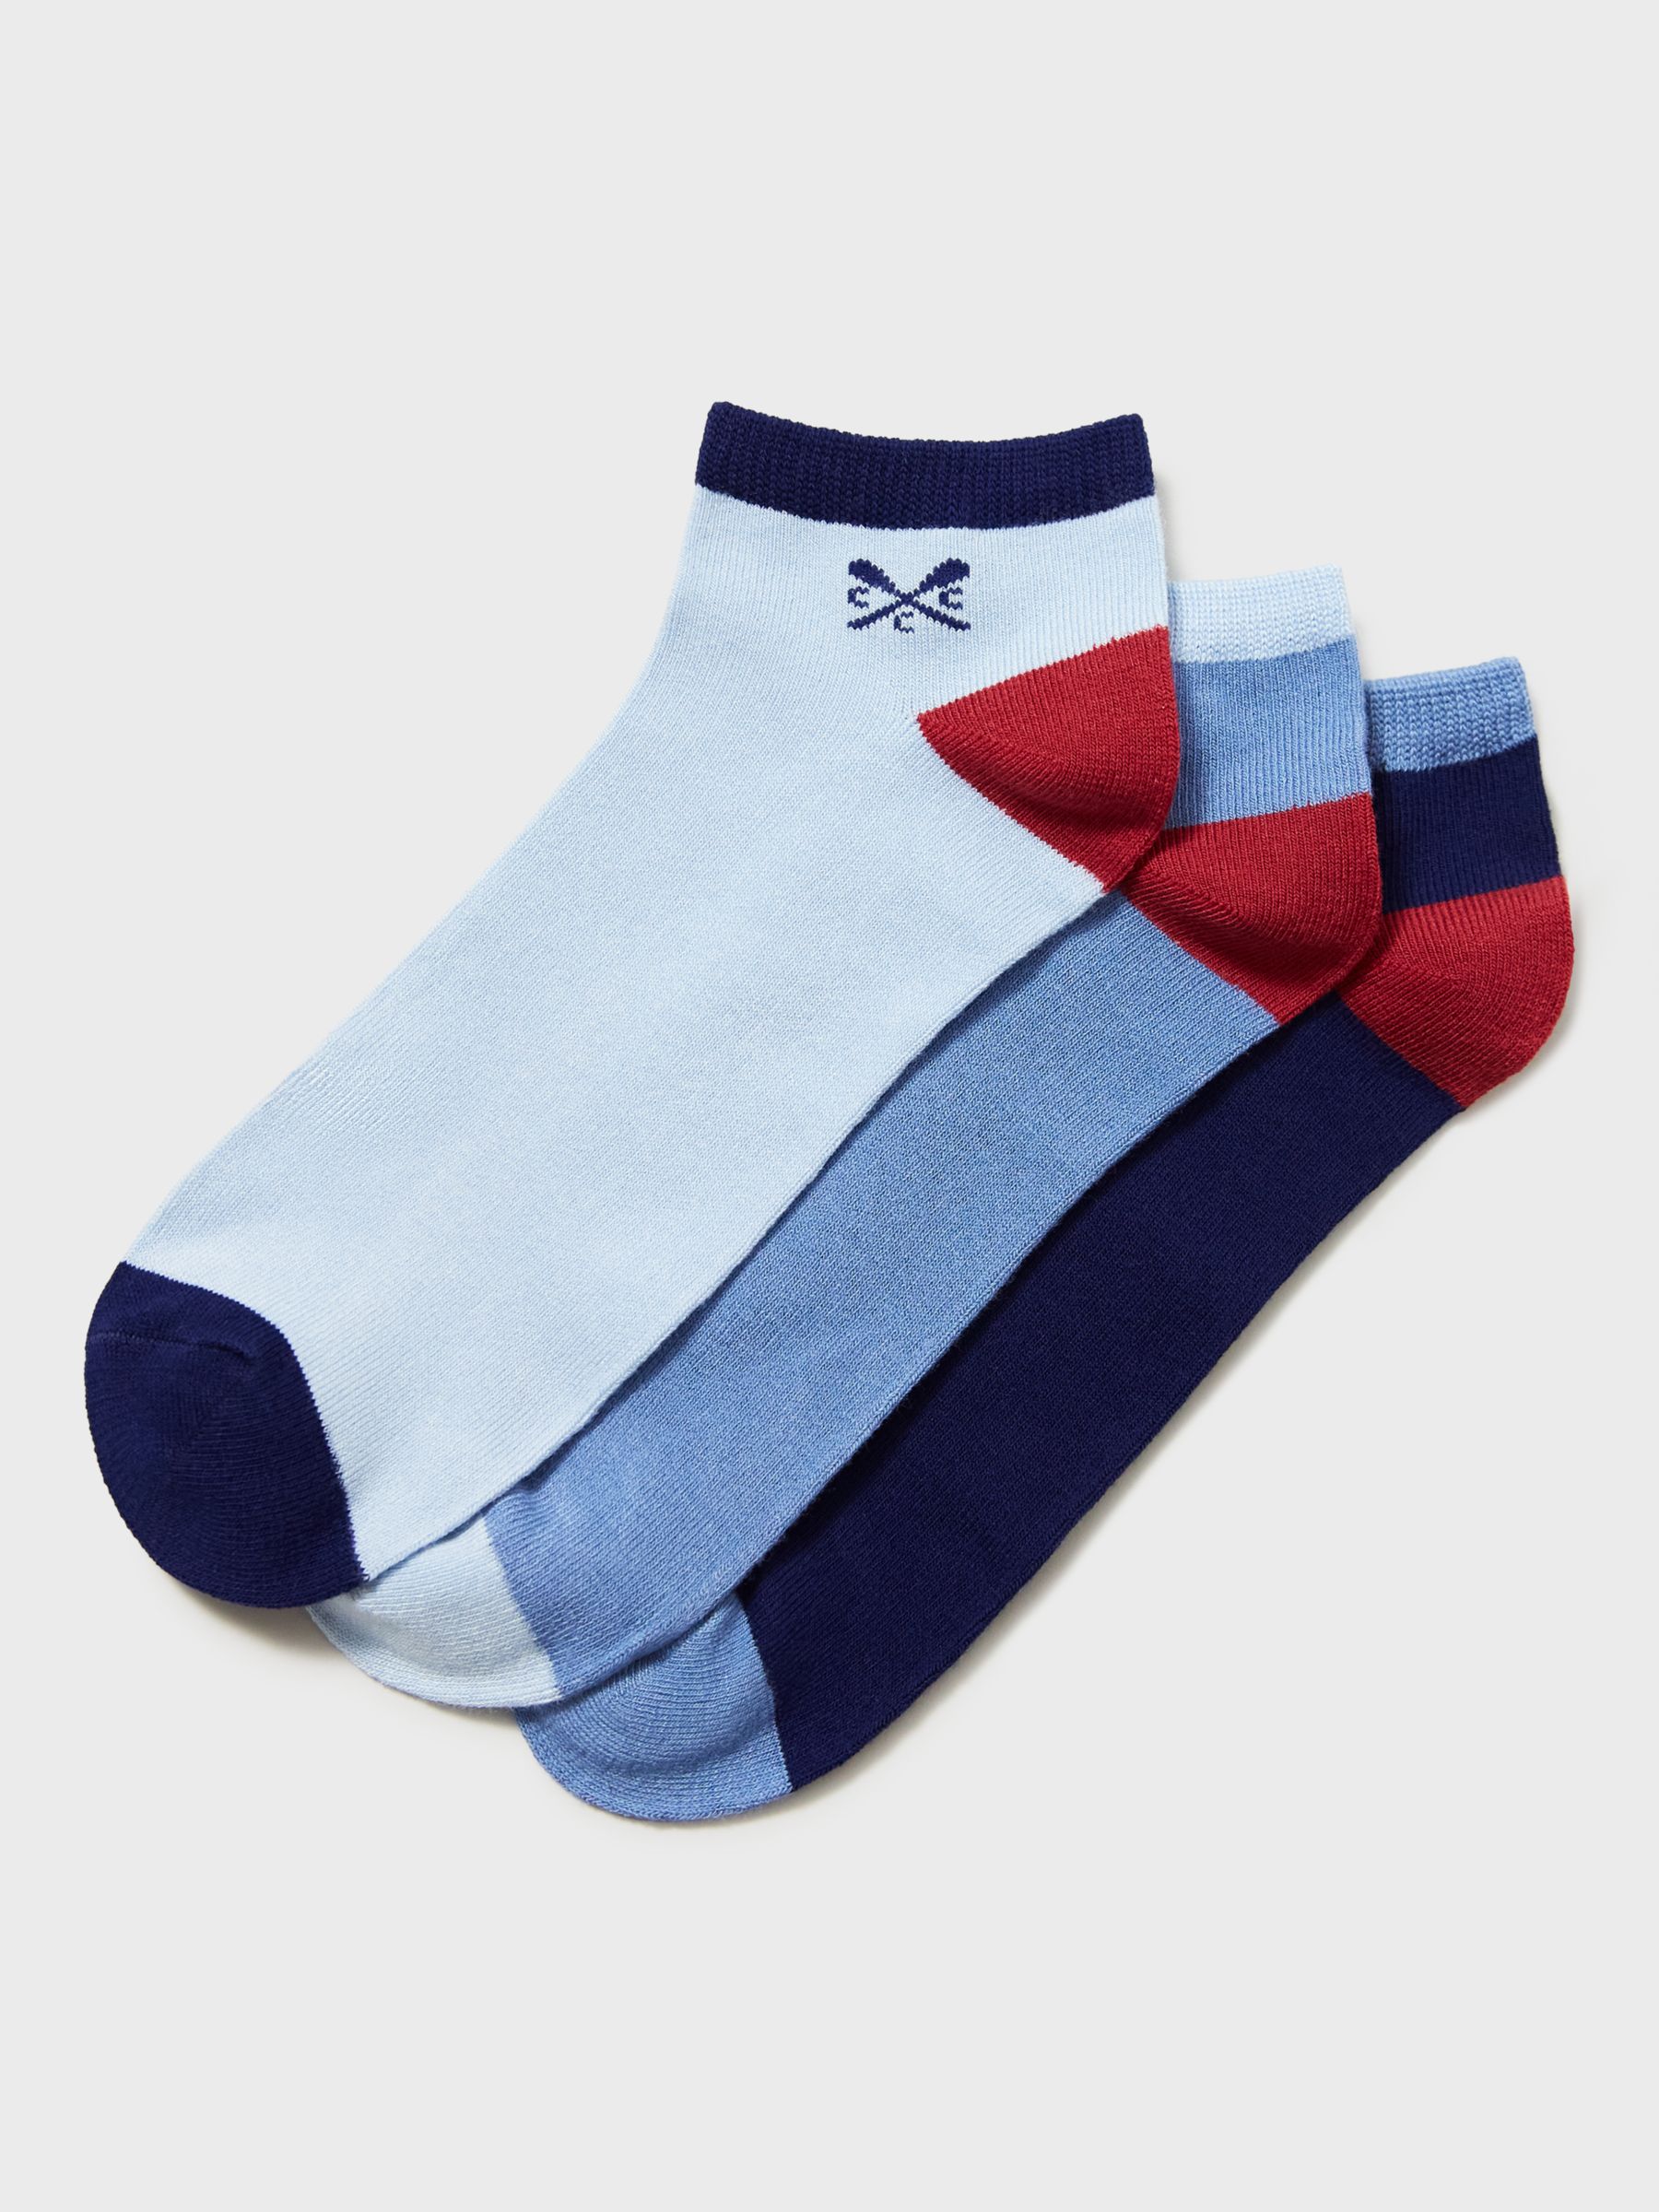 Buy Crew Clothing Bamboo Trainer Socks, Pack of 3, Multi Online at johnlewis.com